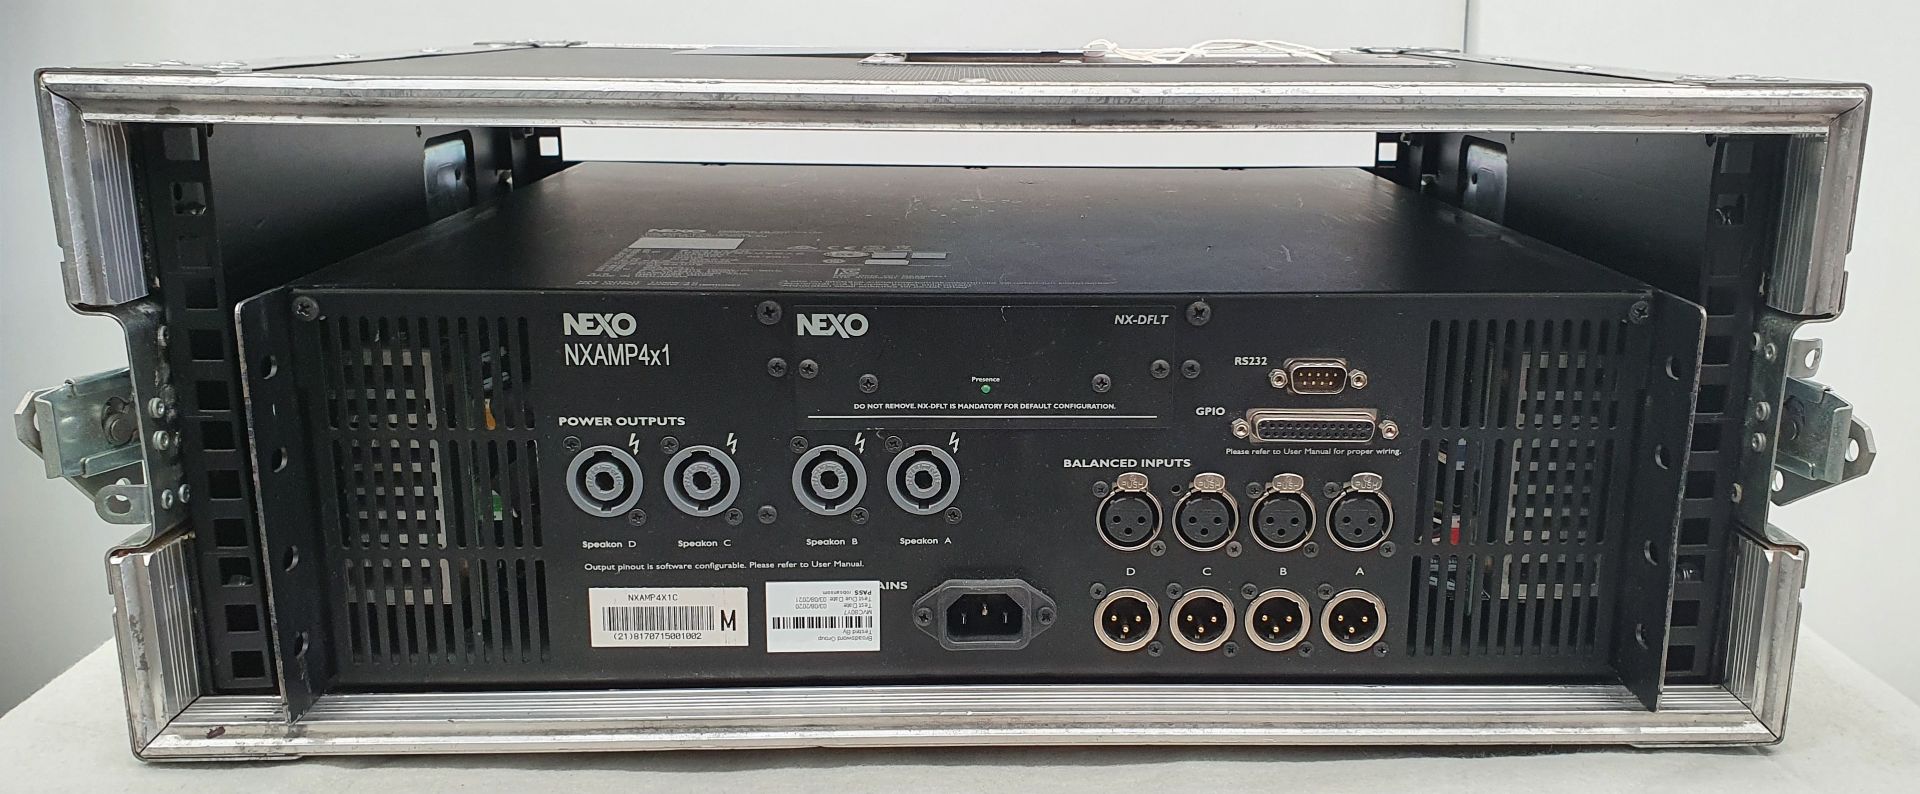 A Nexo NXAMP 4x1 Digital Power Amplifier with flight case (fully tested and working). - Image 3 of 4